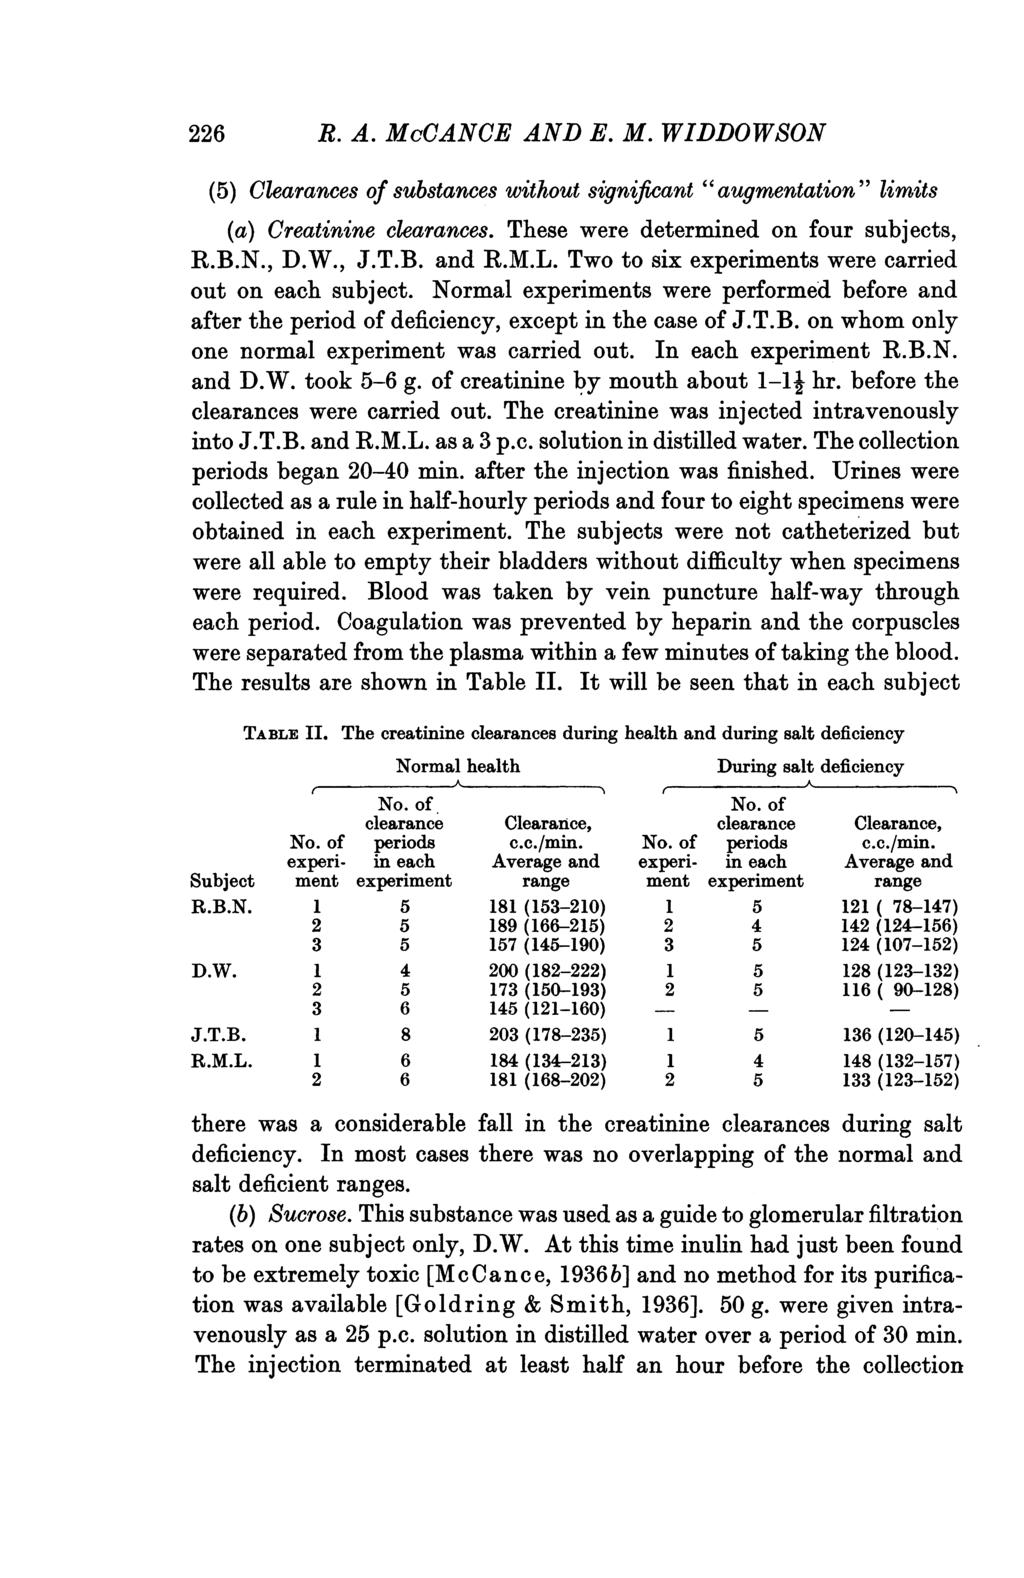 226 R. A. McCANCE AND E. M. WIDDOWSON (5) Clearances of substances without significant "augmentation" limits (a) Creatinine clearances. These were determined on four subjects, R.B.N., D.W., J.T.B. and R.